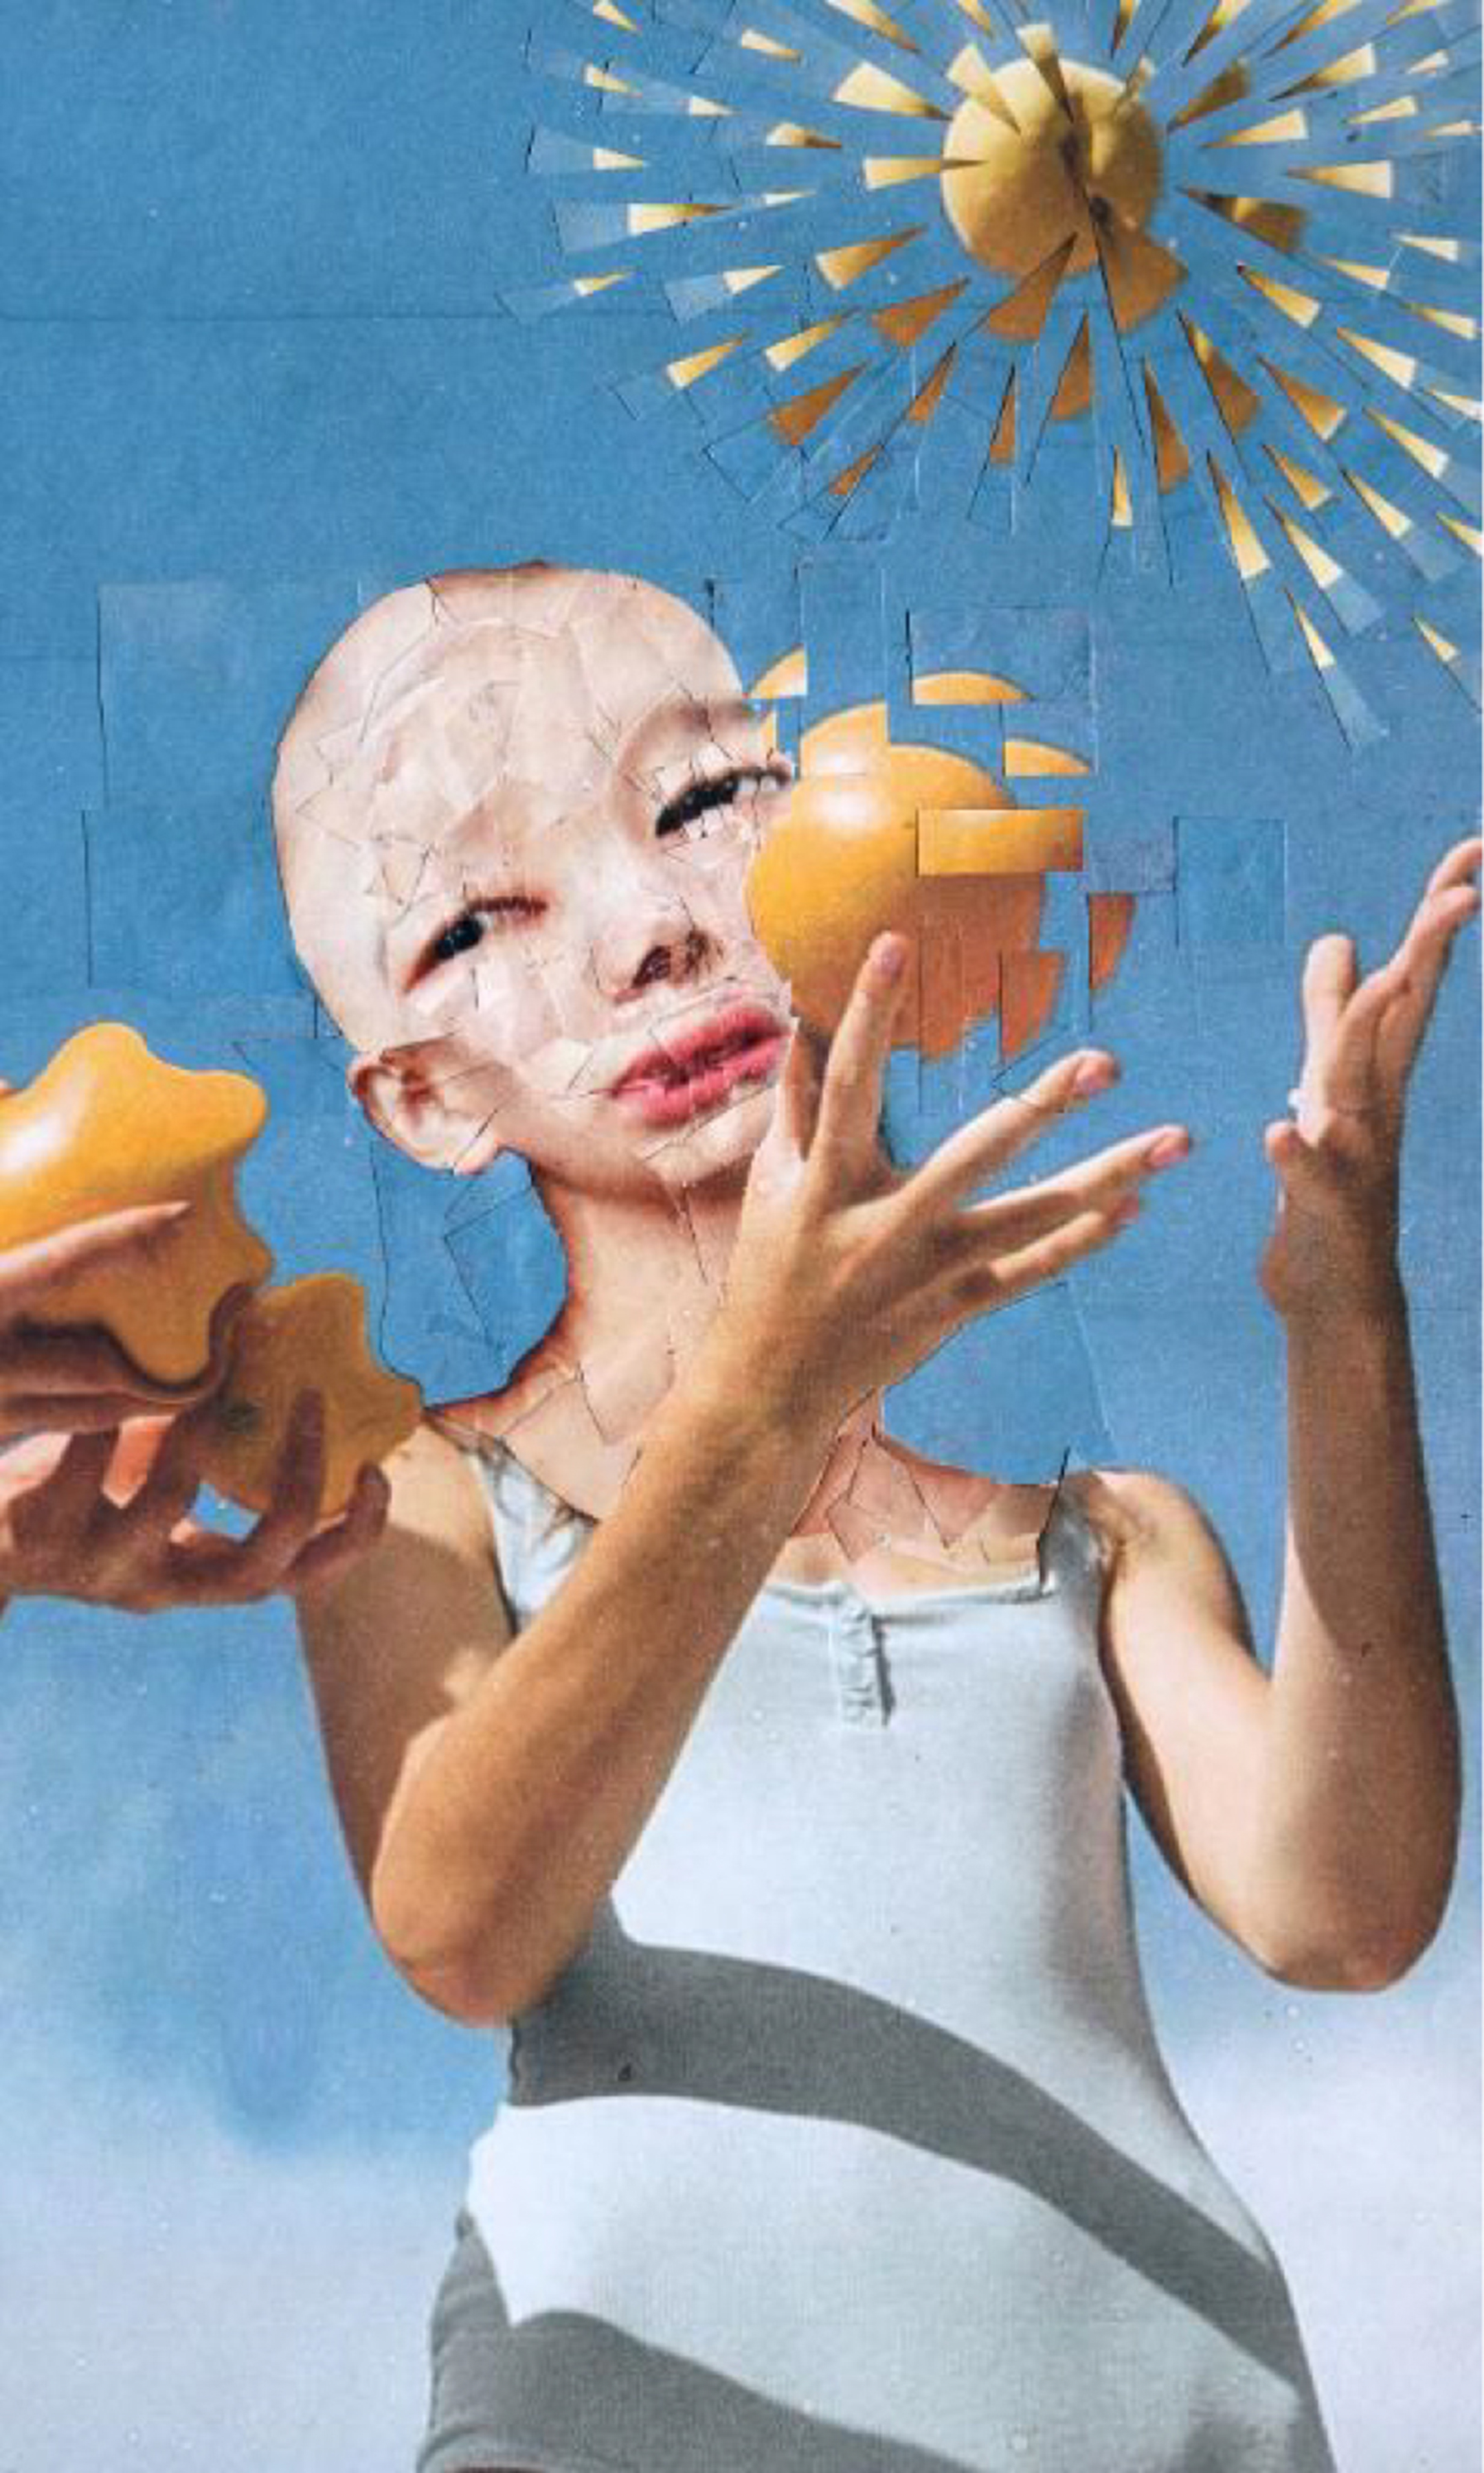 Collaged image of a woman with a distorted baby face throwing fragmented oranges in the air